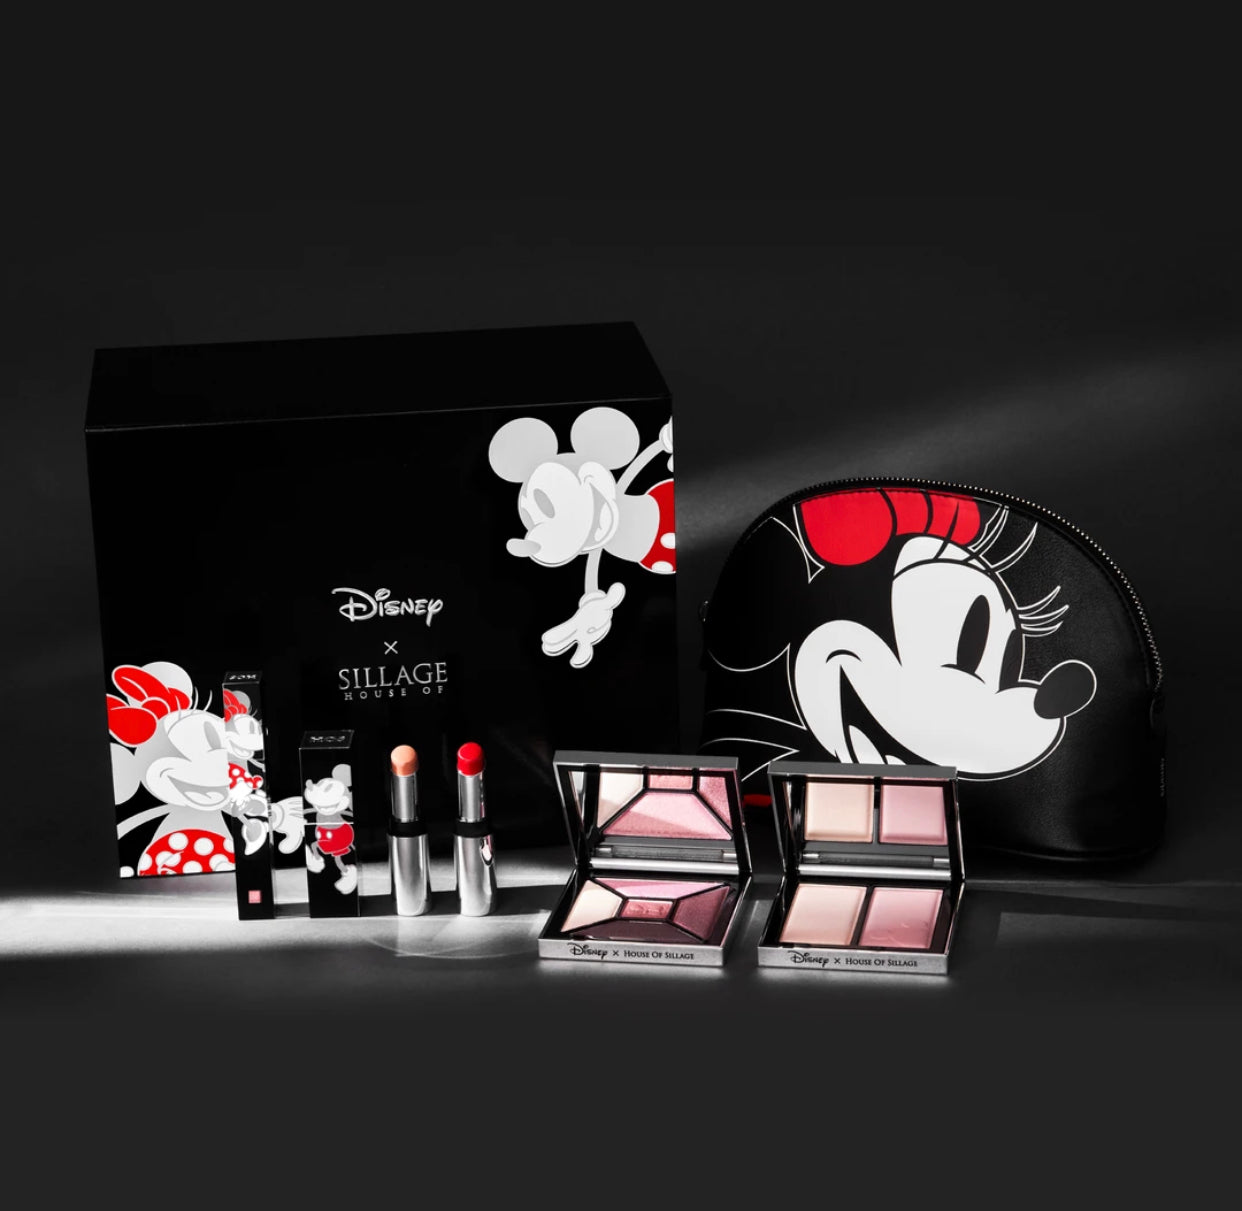 HOUSE OF SILLAGE, DISNEY X HOUSE OF SILLAGE COLLECTOR SET LIMITED EDITION